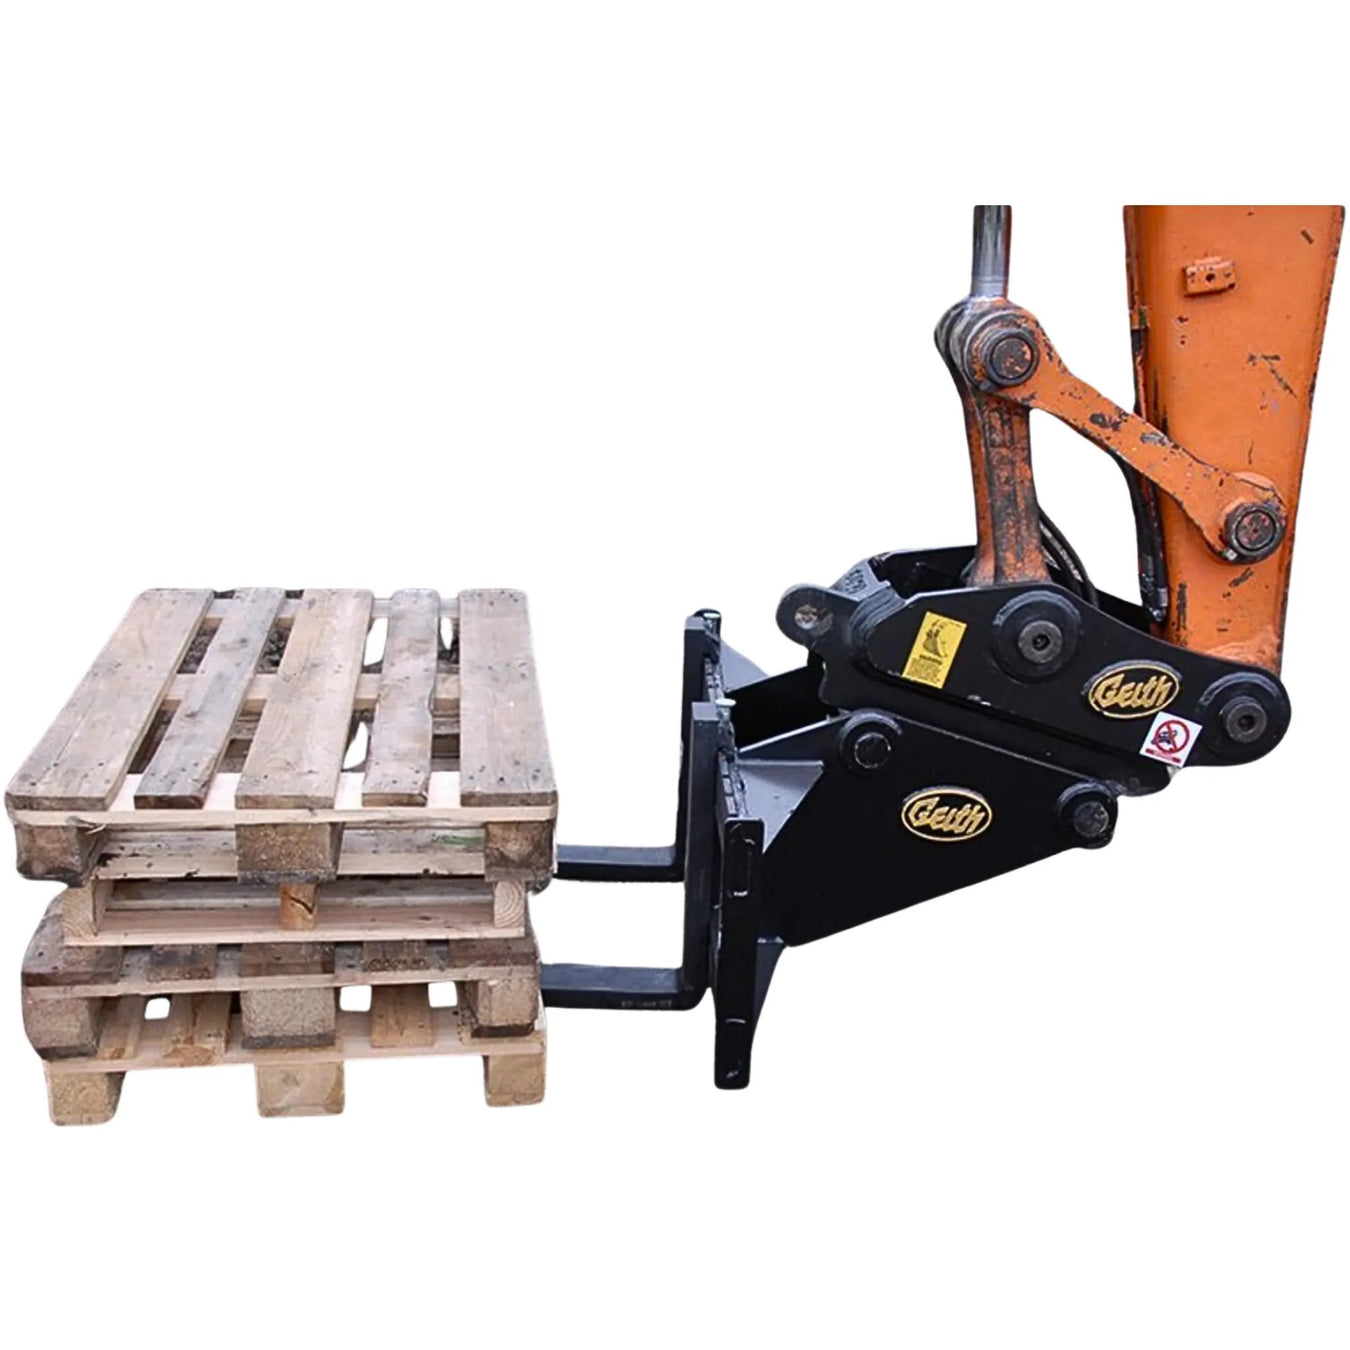 Geith Pallet Forks - Attachments King